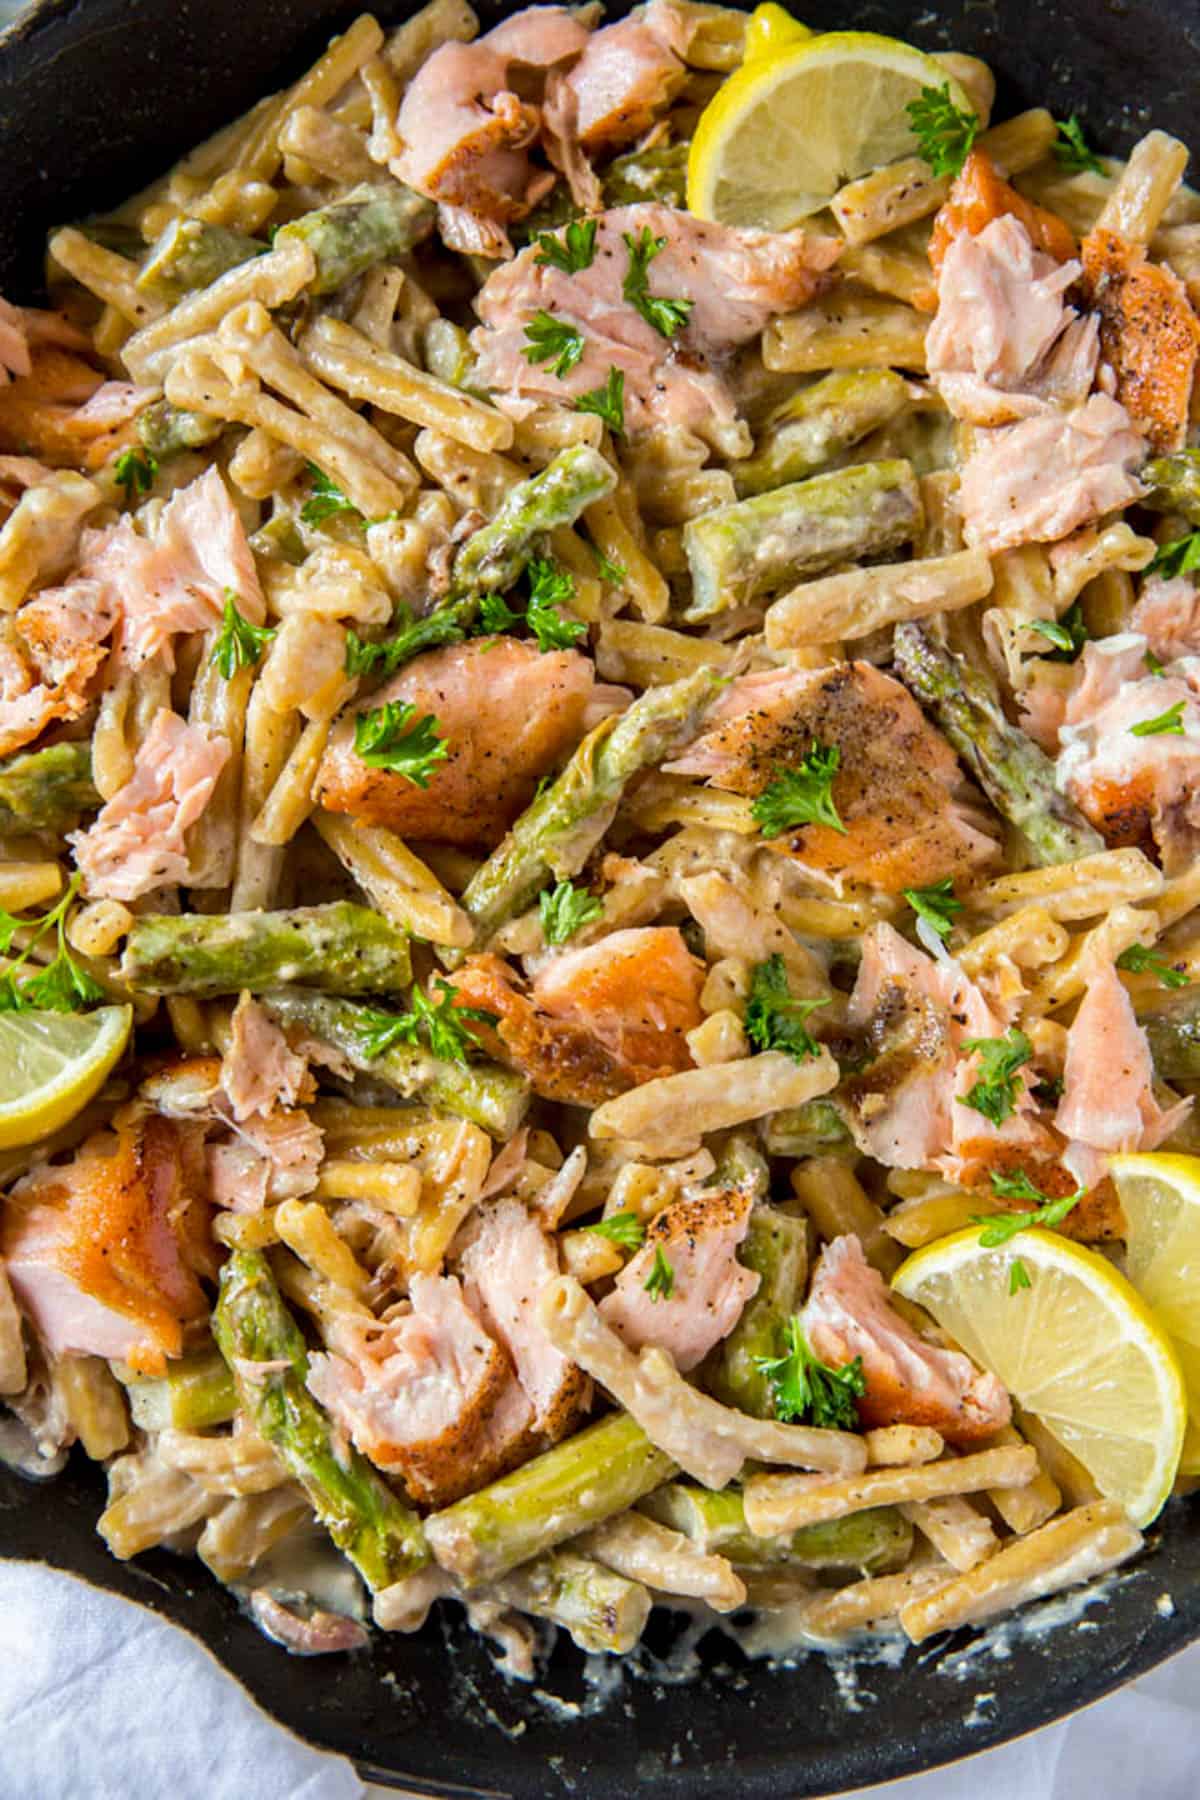 Cooked pasta with salmon, asparagus and a creamy lemon sauce in a skillet ready for serving. Freshly chopped parsley is garnished on top.